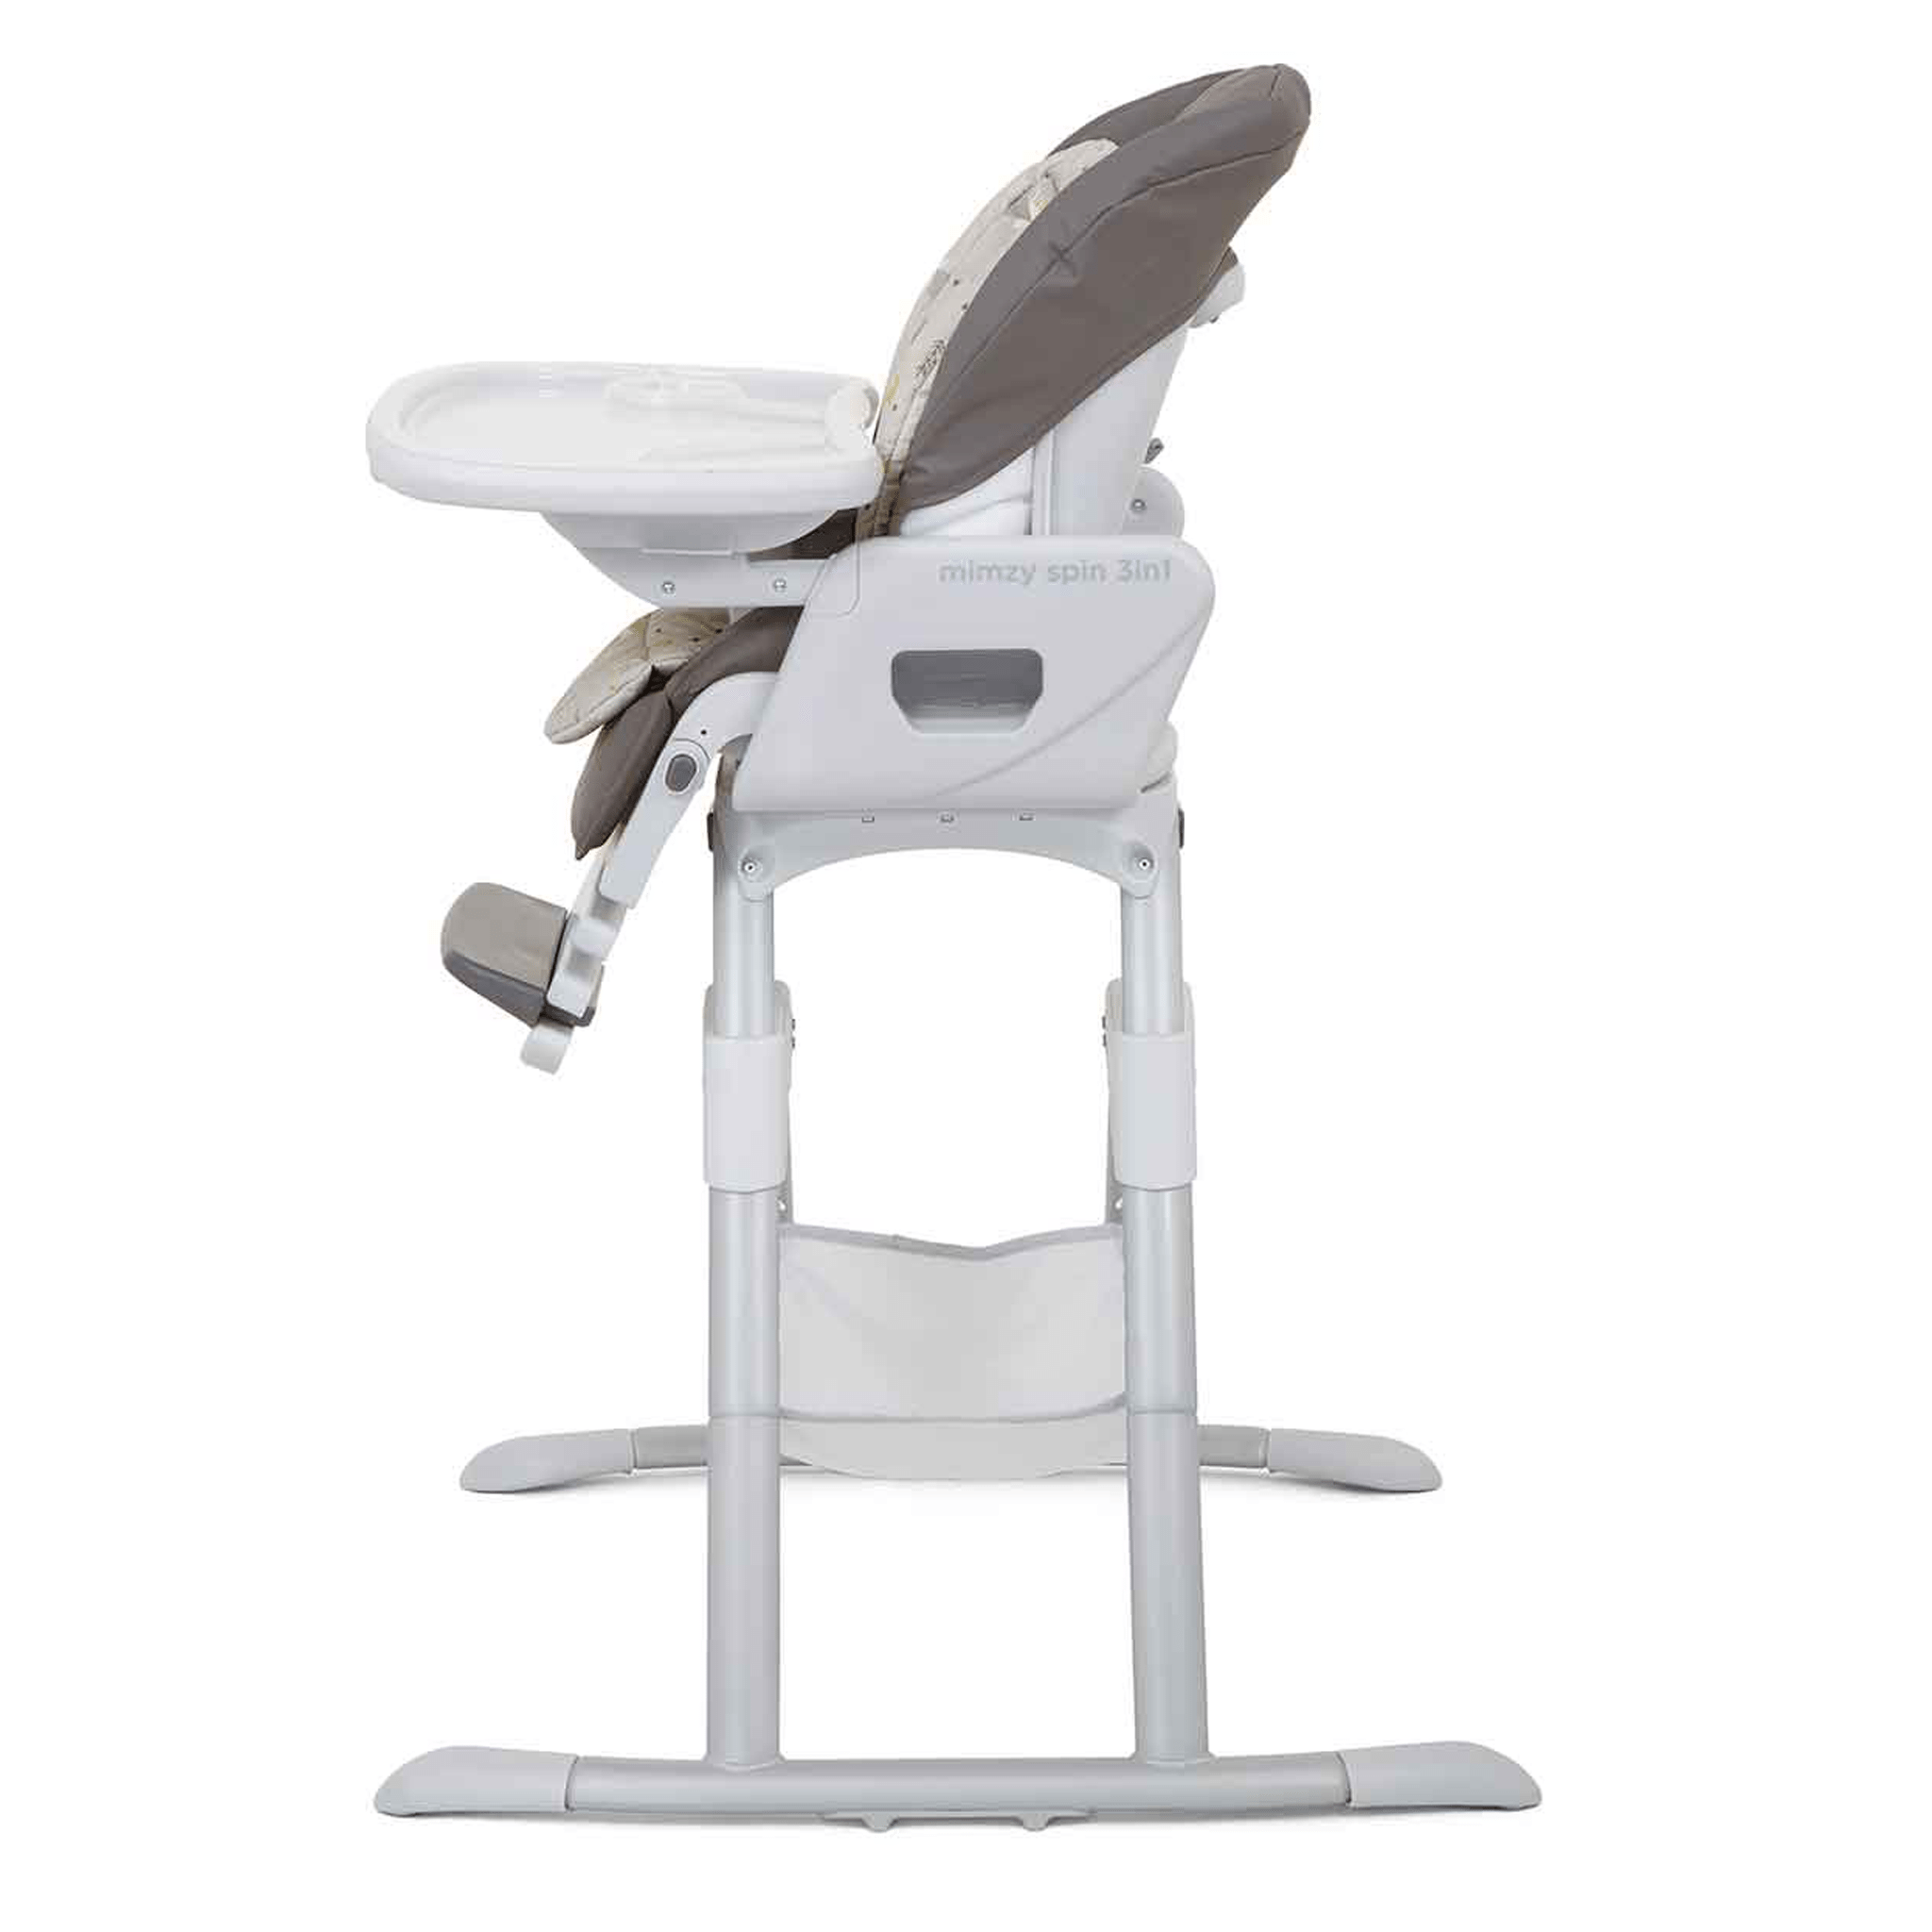 Joie baby highchairs Joie Mimzy Spin 3in1 Highchair - Geometric Mountains H1124BAGEM000